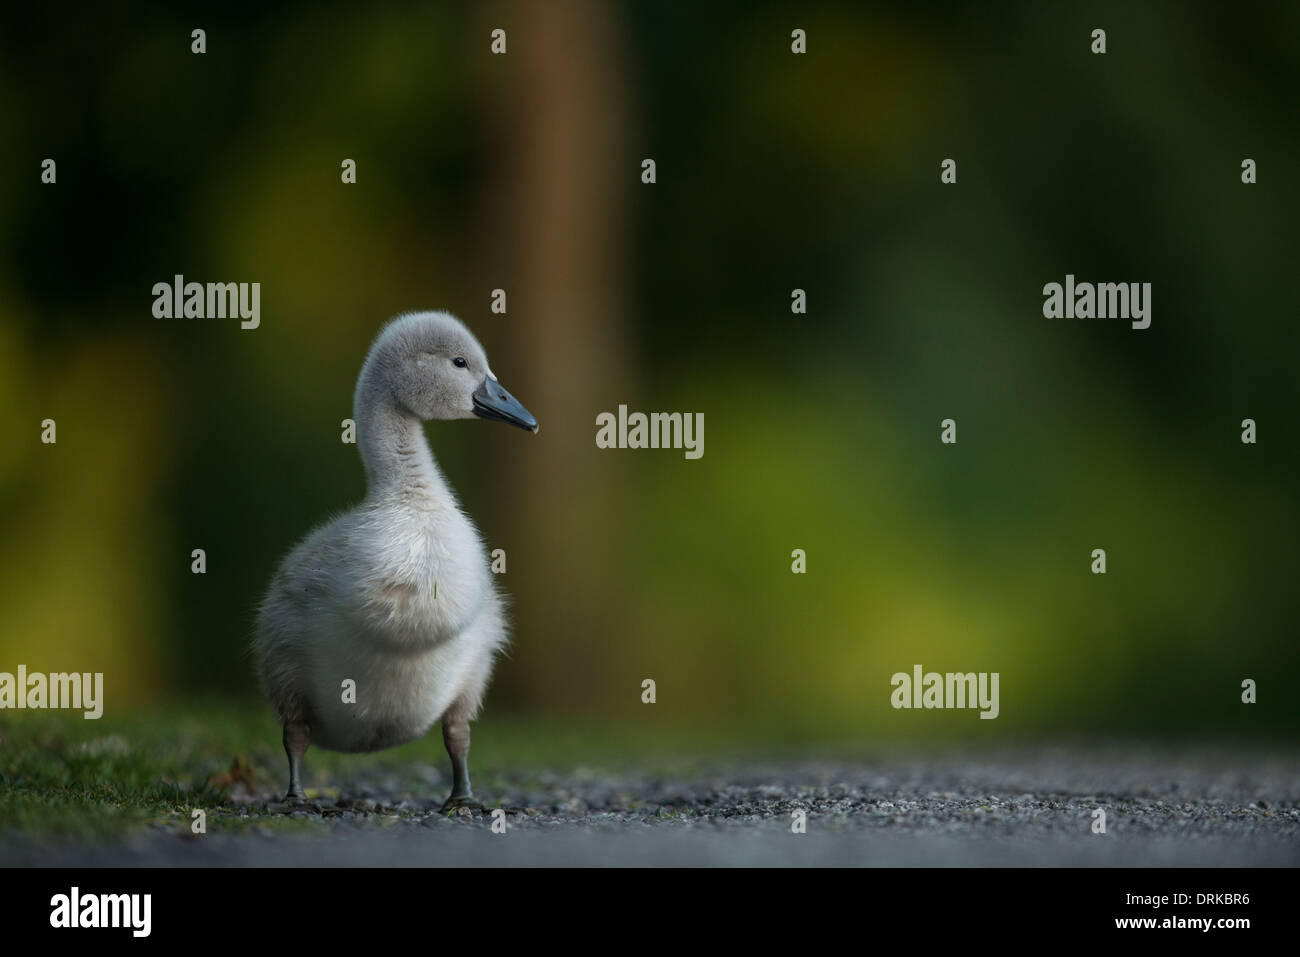 solitary cygnet standing, looking out of frame on path, Stock Photo